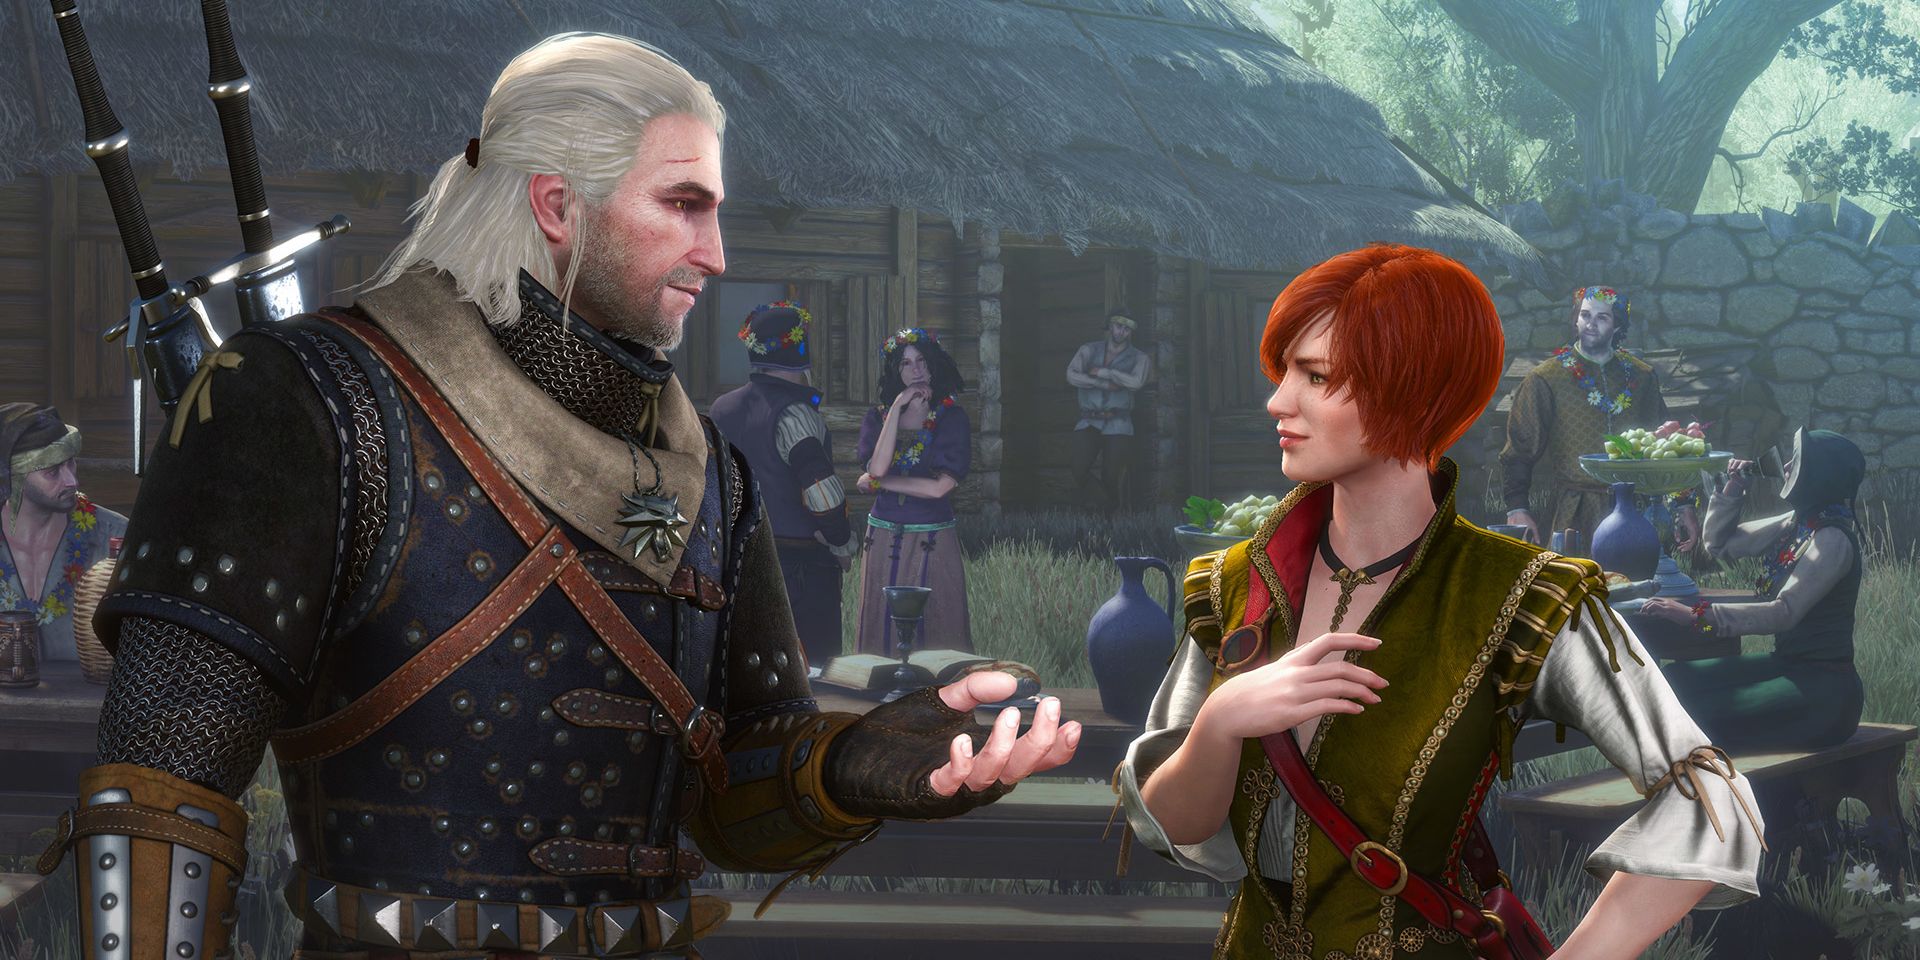 possessed geralt and shani at wedding